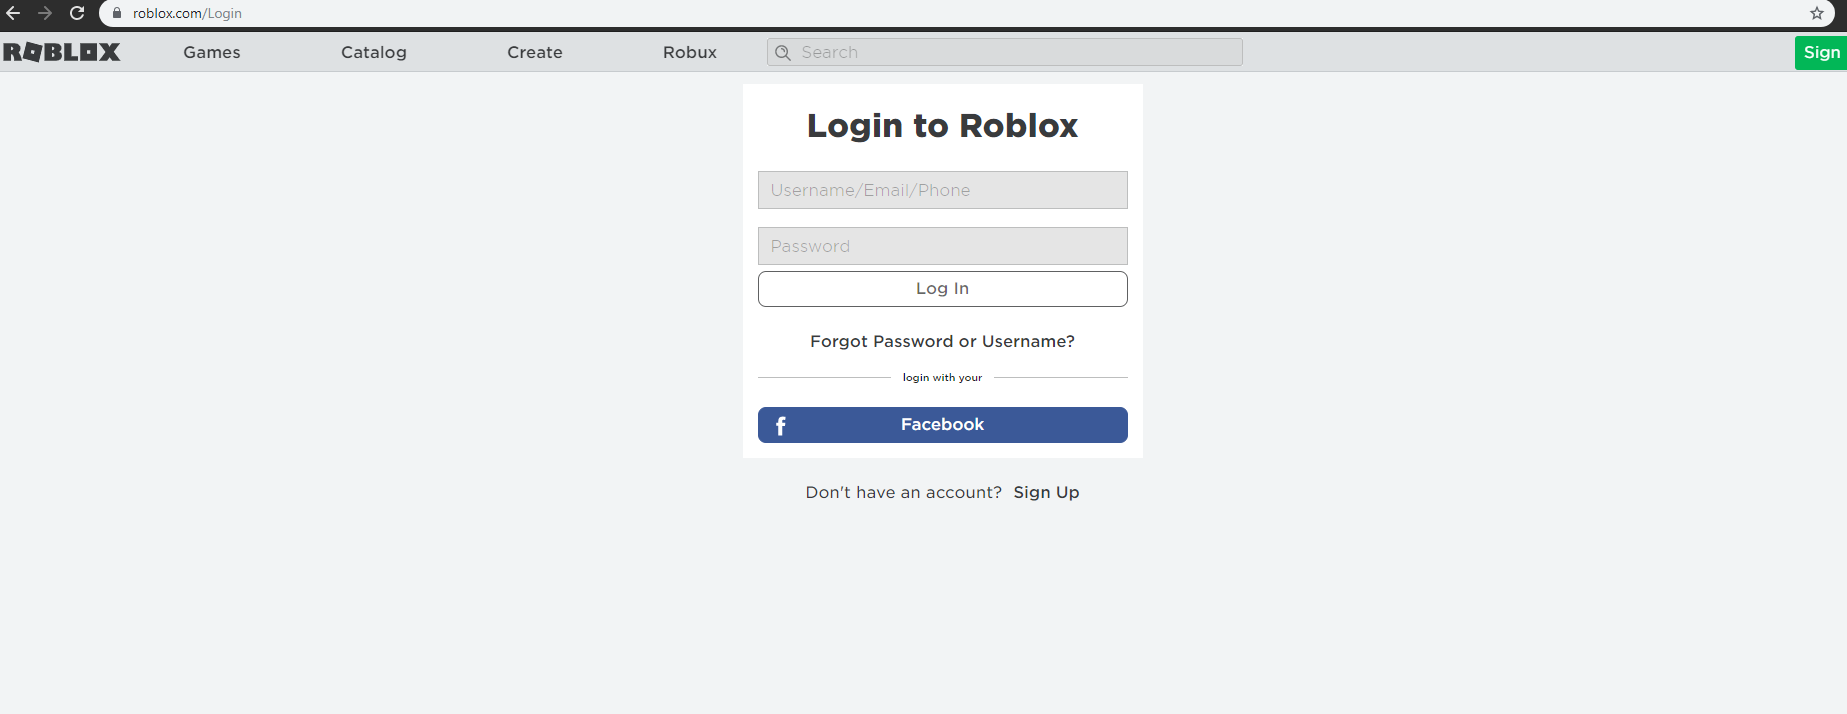 How To Login To Roblox If You Forgot Password